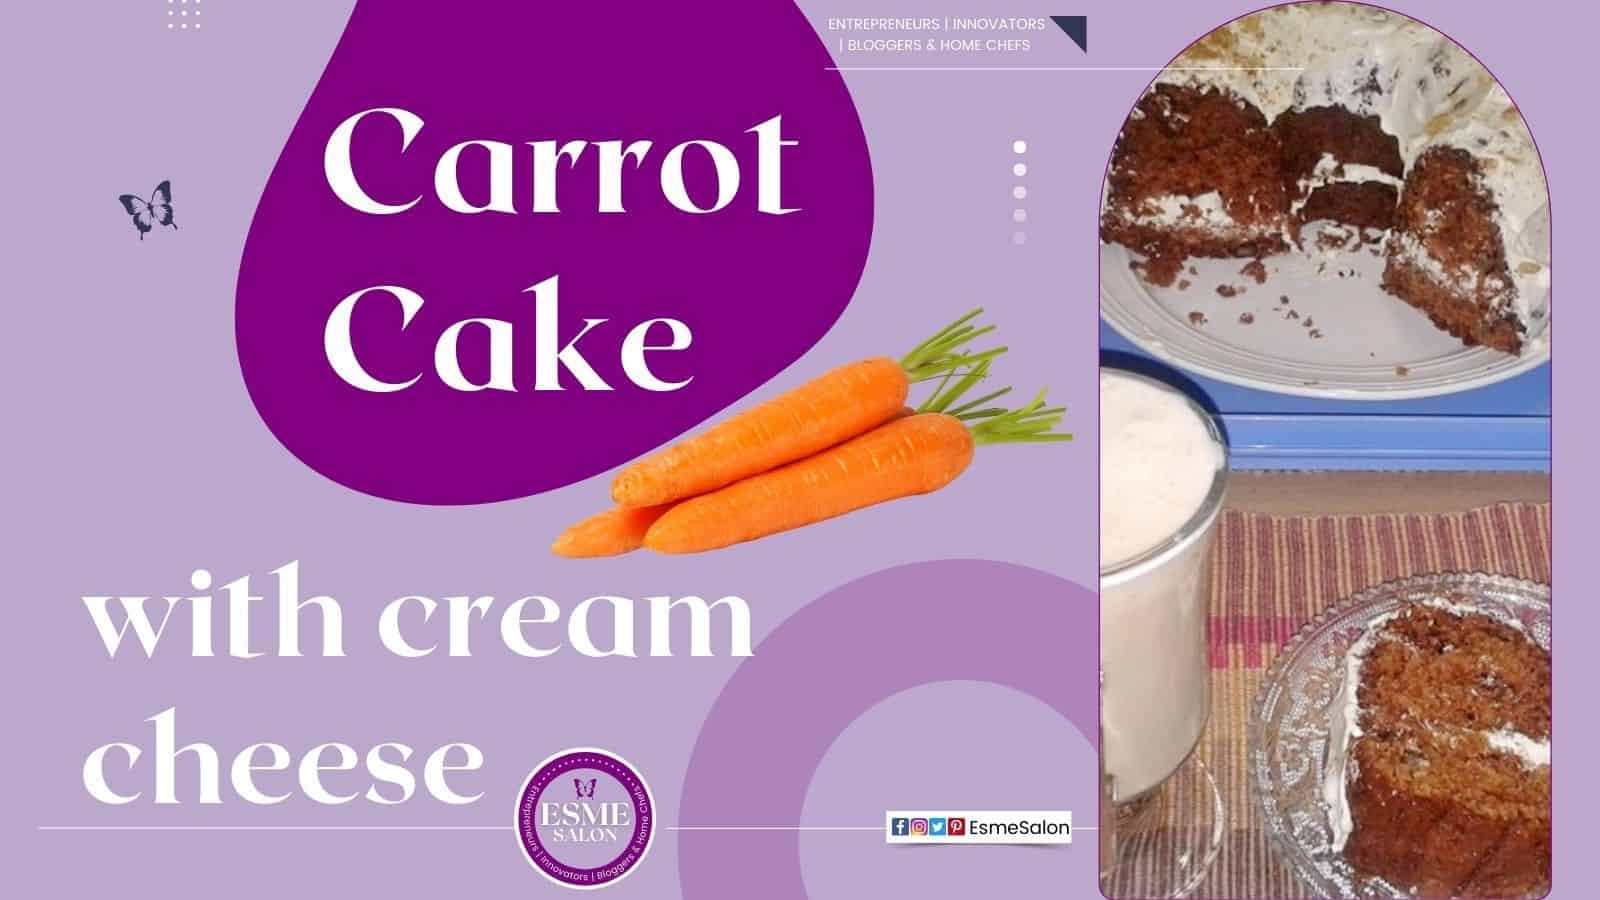 Carrot Cake with cream cheese and walnuts